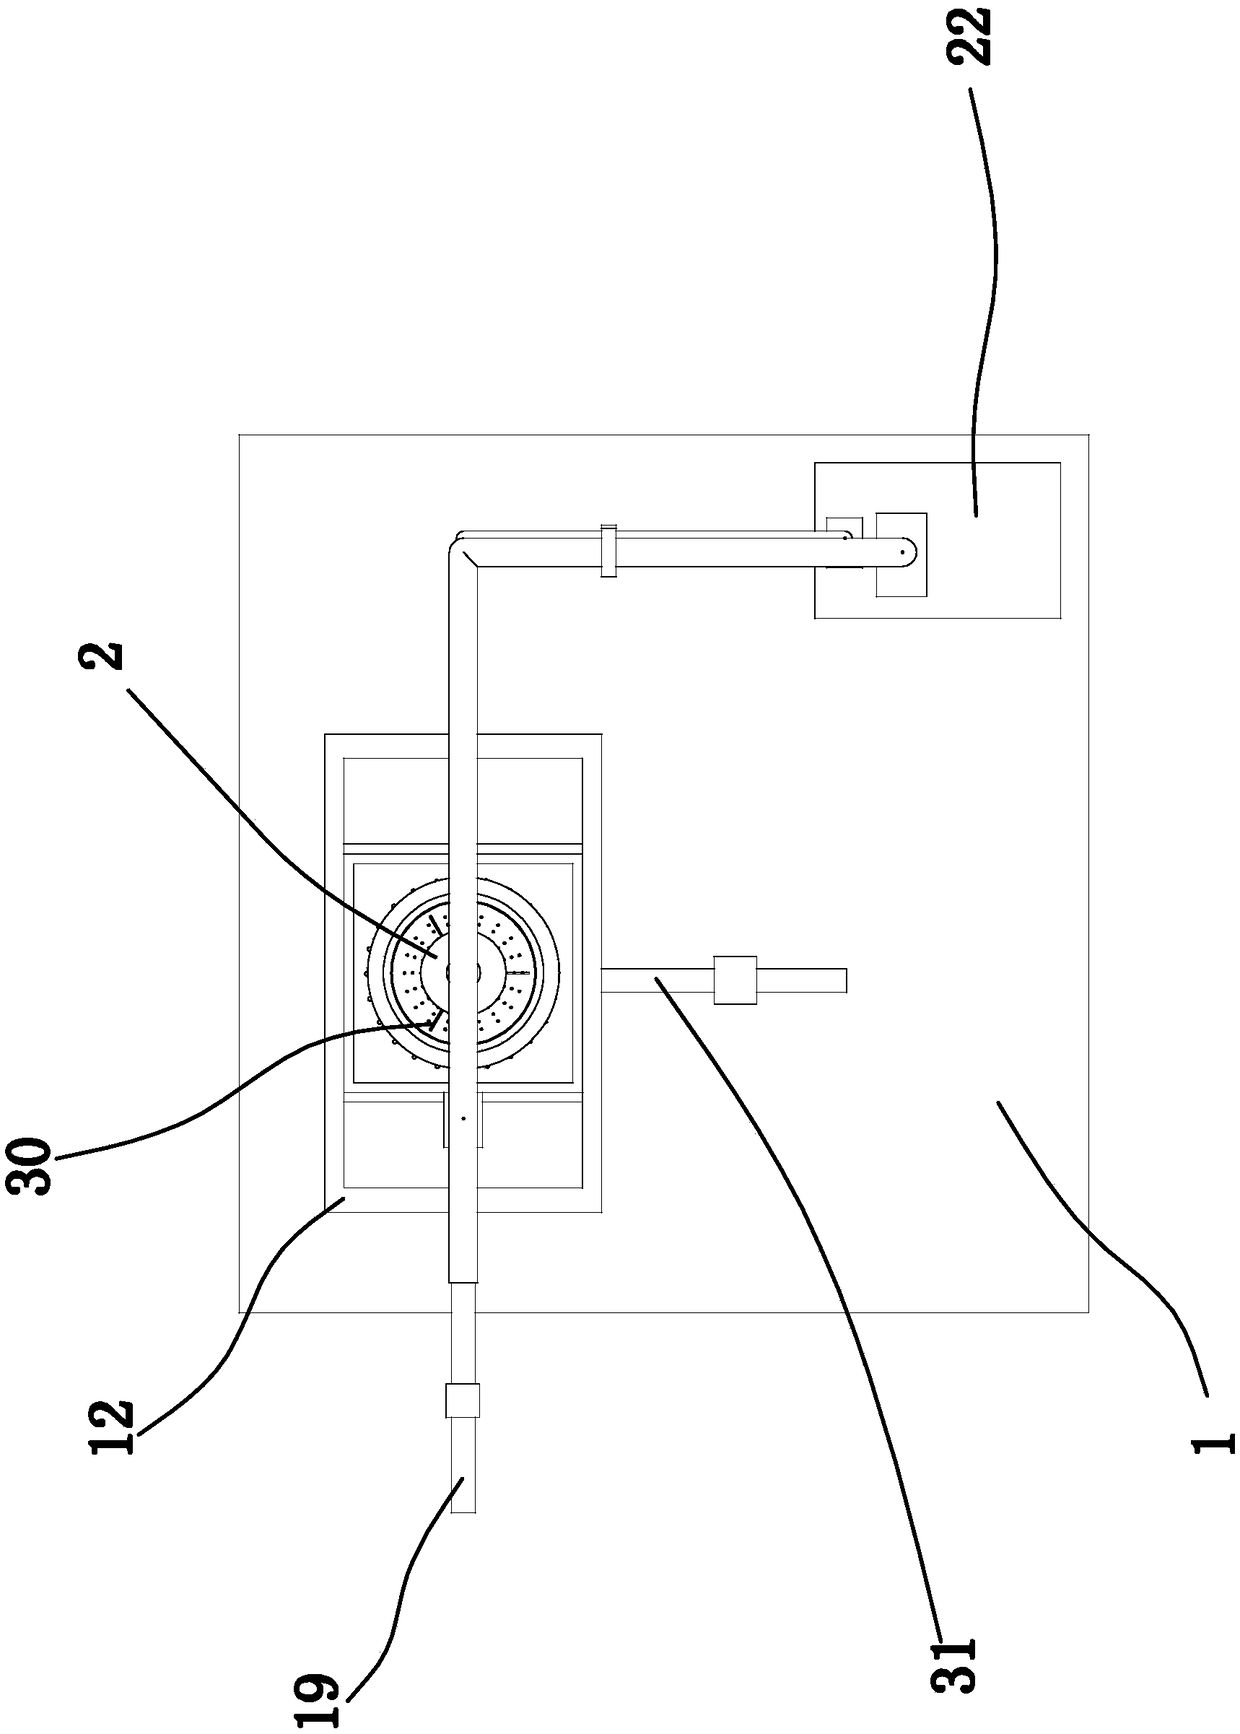 Filtering equipment for cooling fluid during numerical control machining